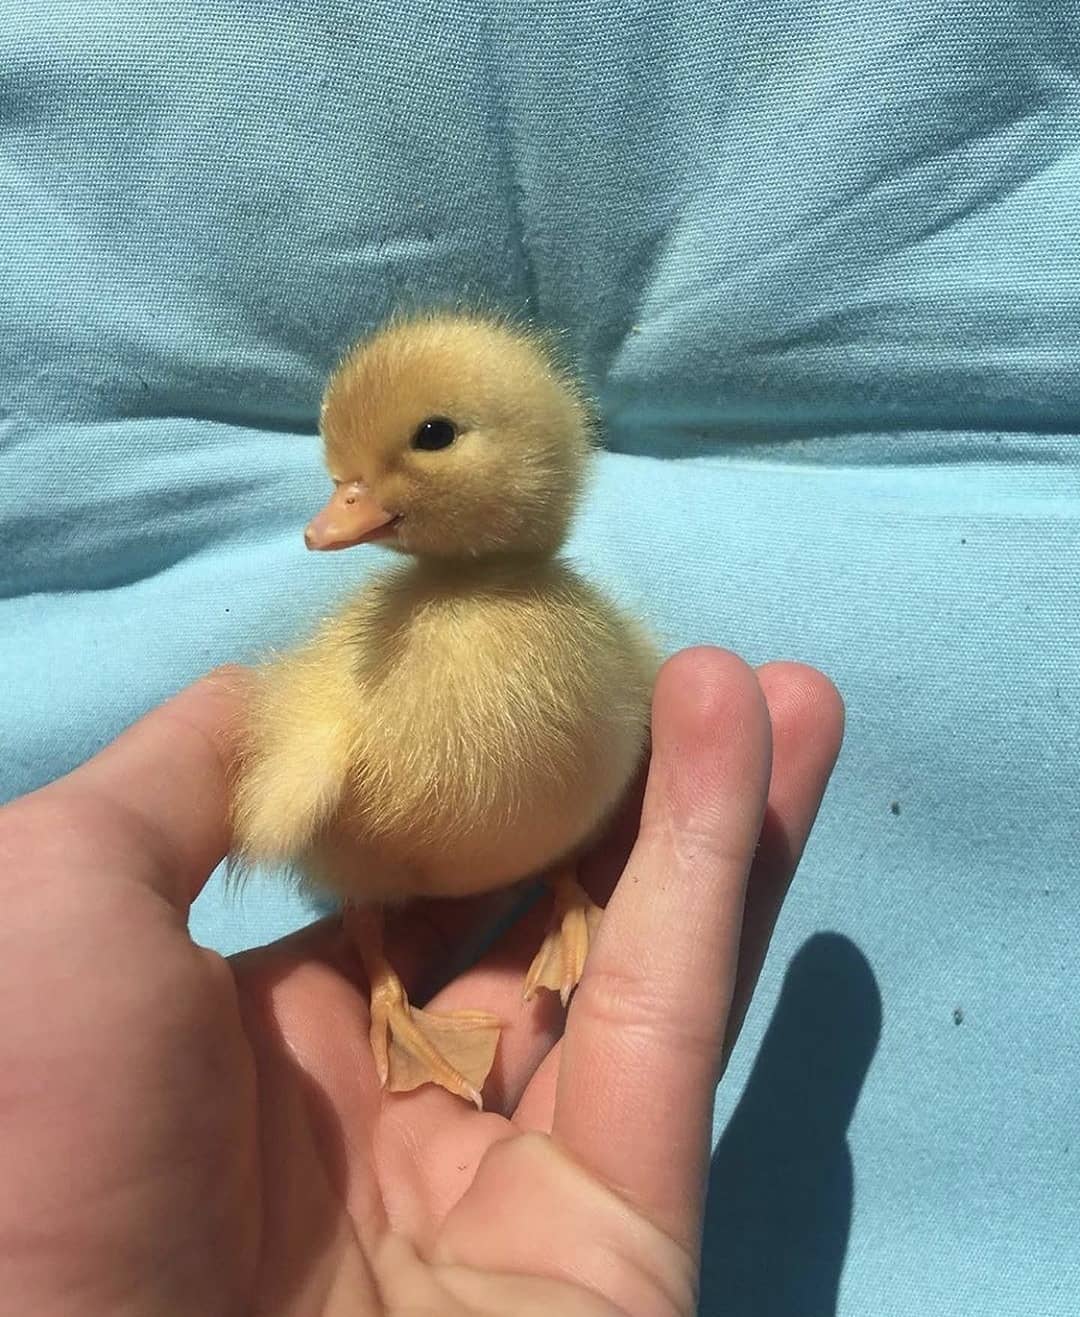 Here's a cute little duck for you, because...........................,etc.